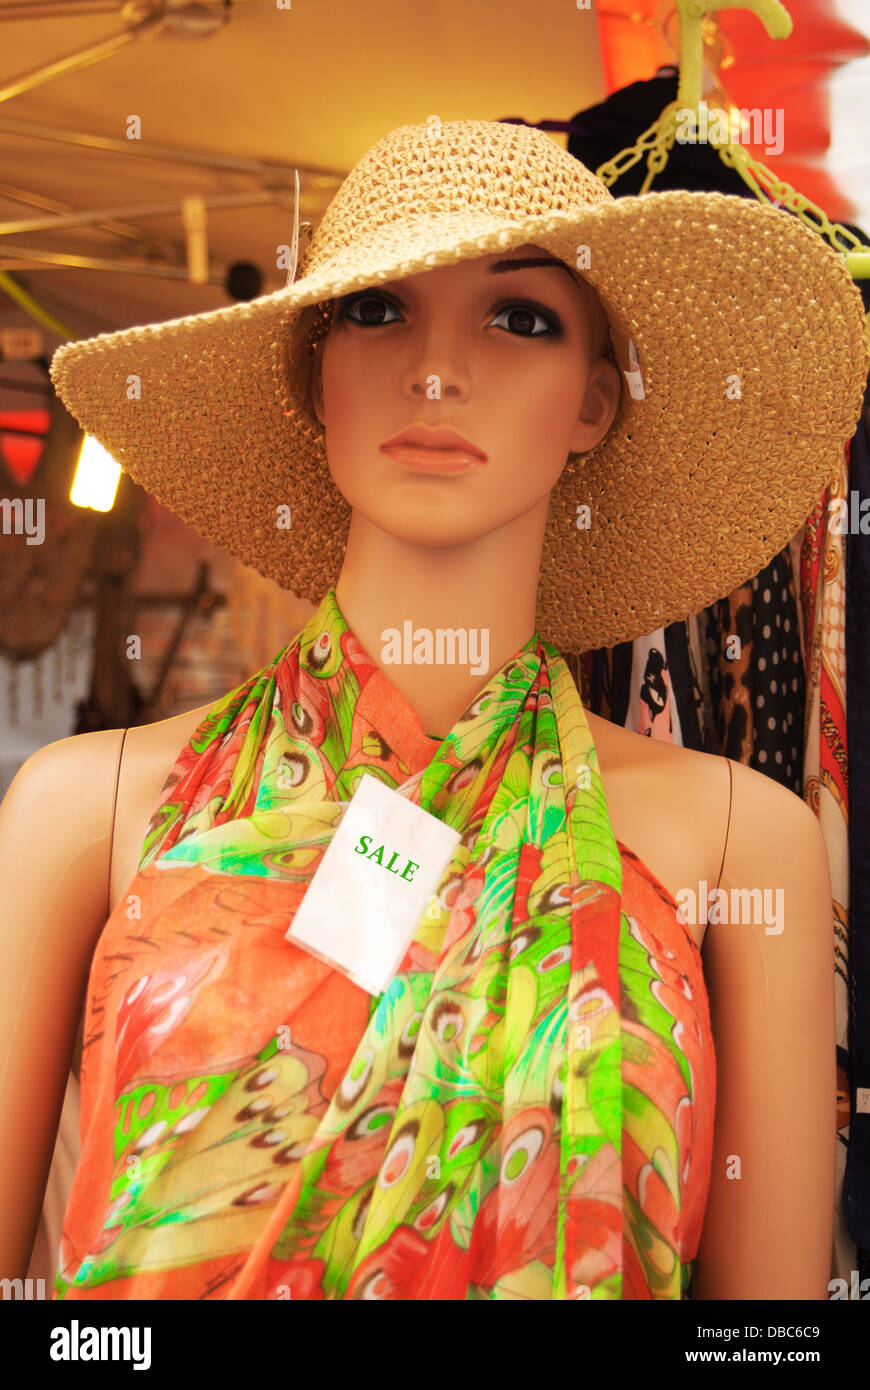 Woman mannequin dressed in a colourful summer dress and a straw hat with a sale sign Stock Photo